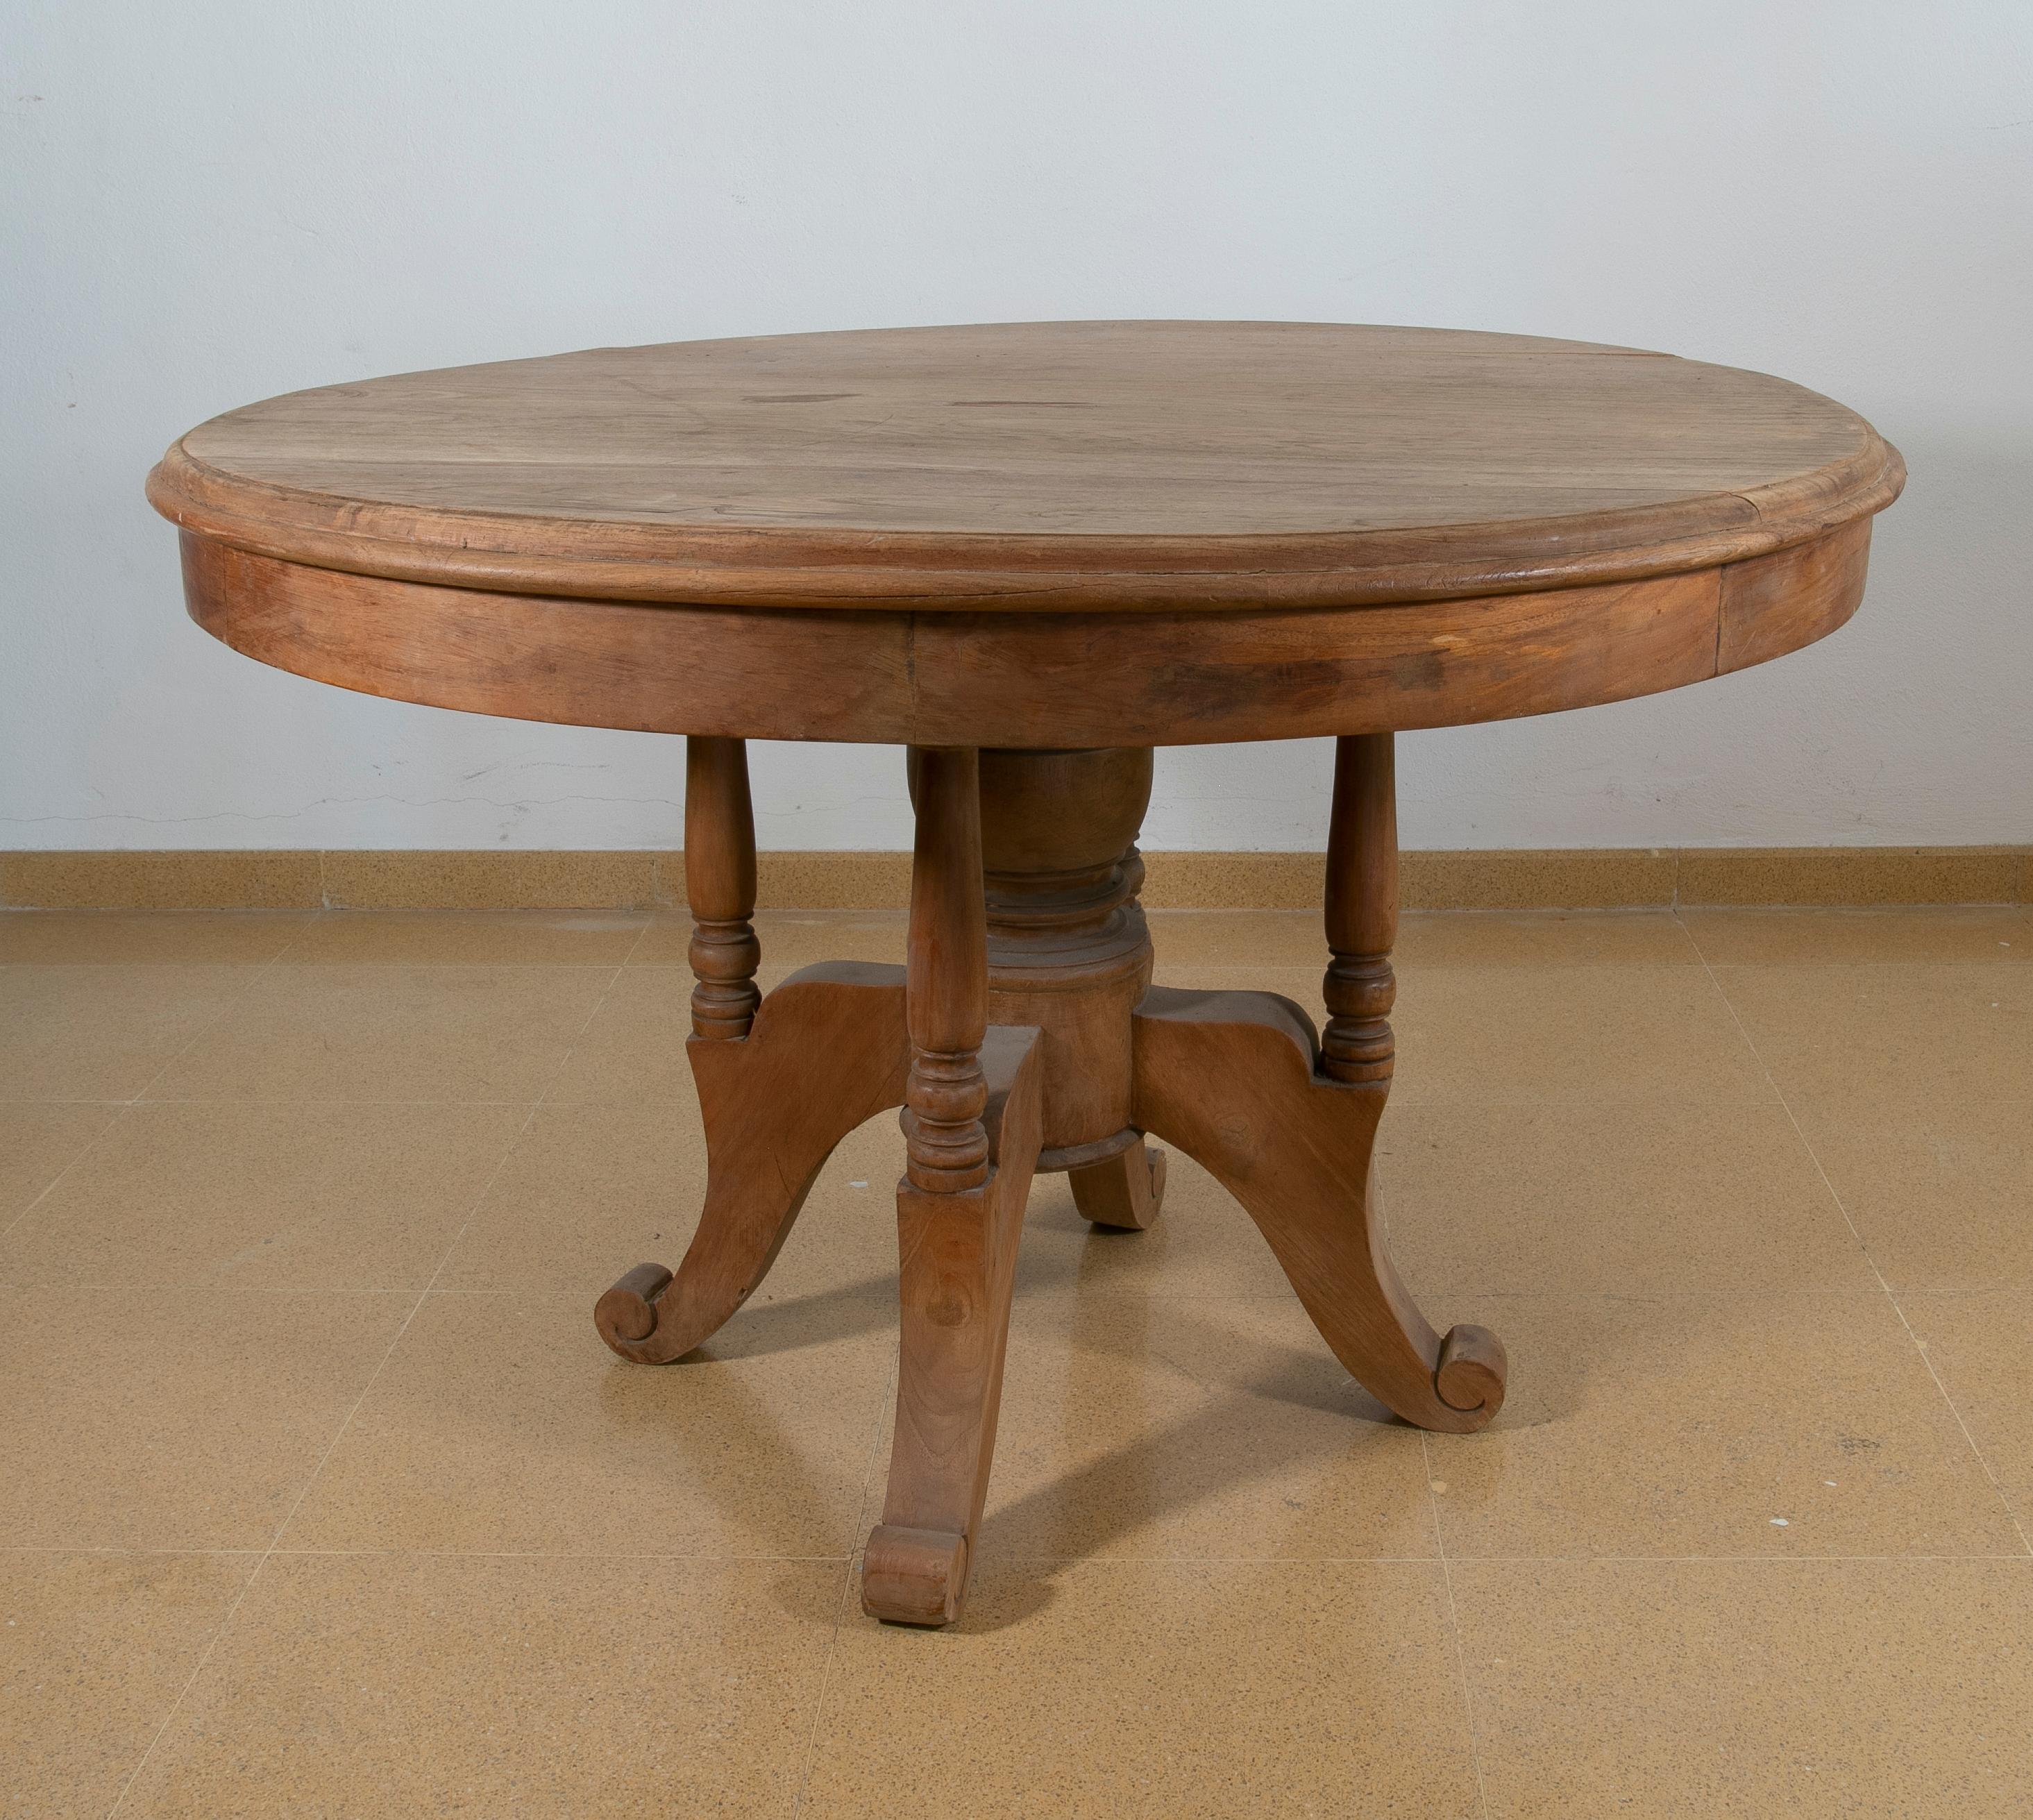 Spanish round table in wood in the original colour with turned legs.